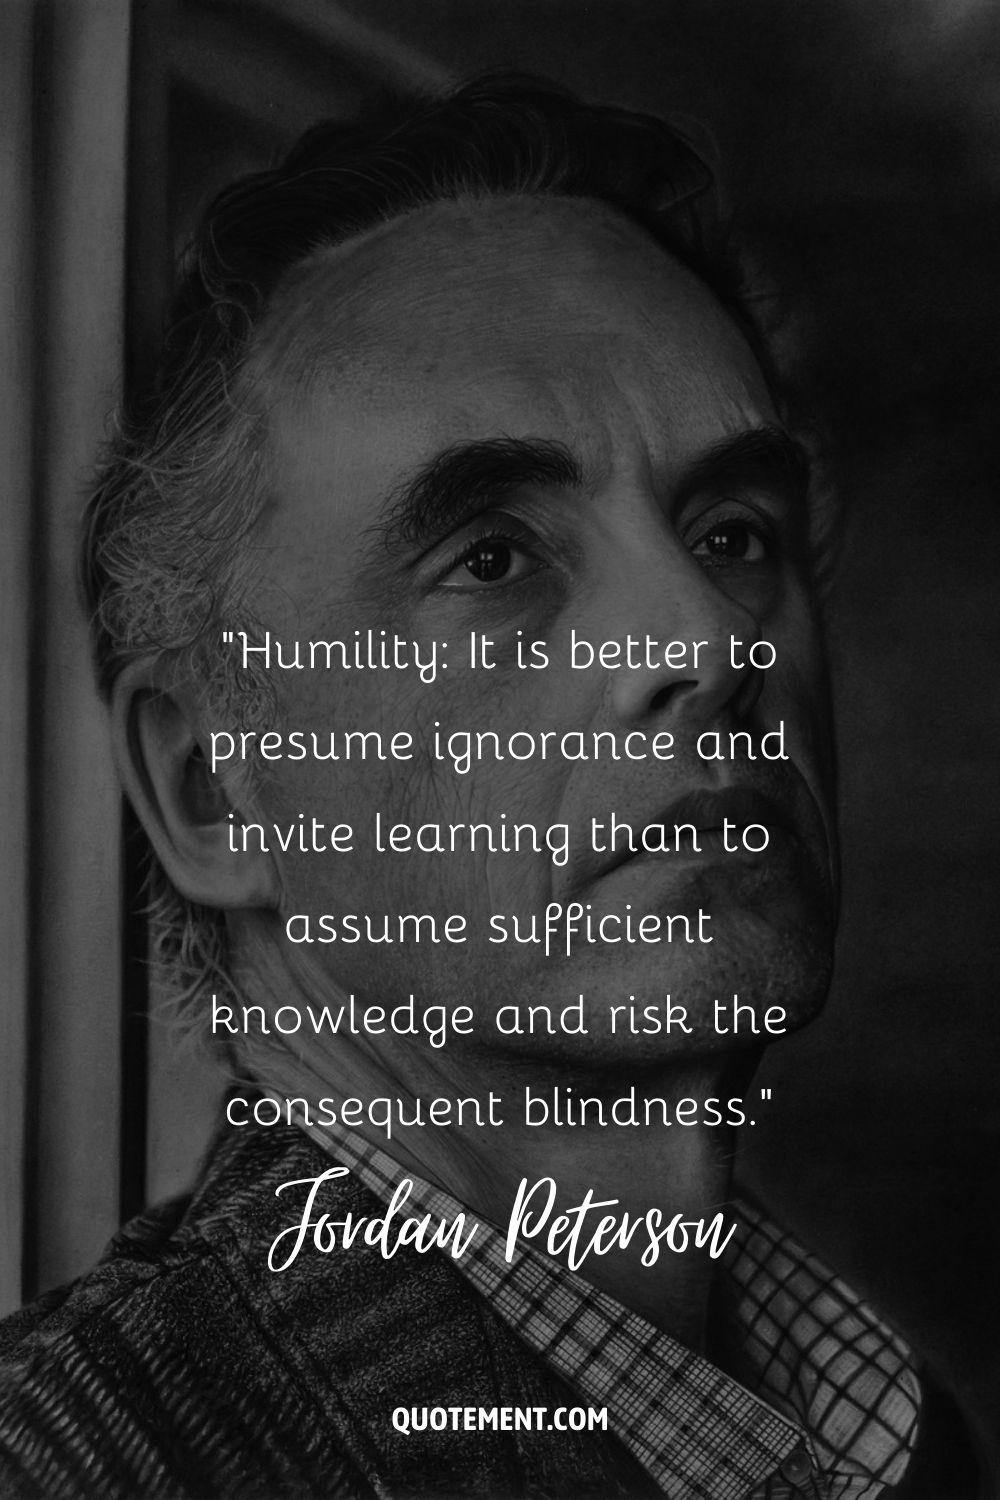 Humility It is better to presume ignorance and invite learning than to assume sufficient knowledge and risk the consequent blindness